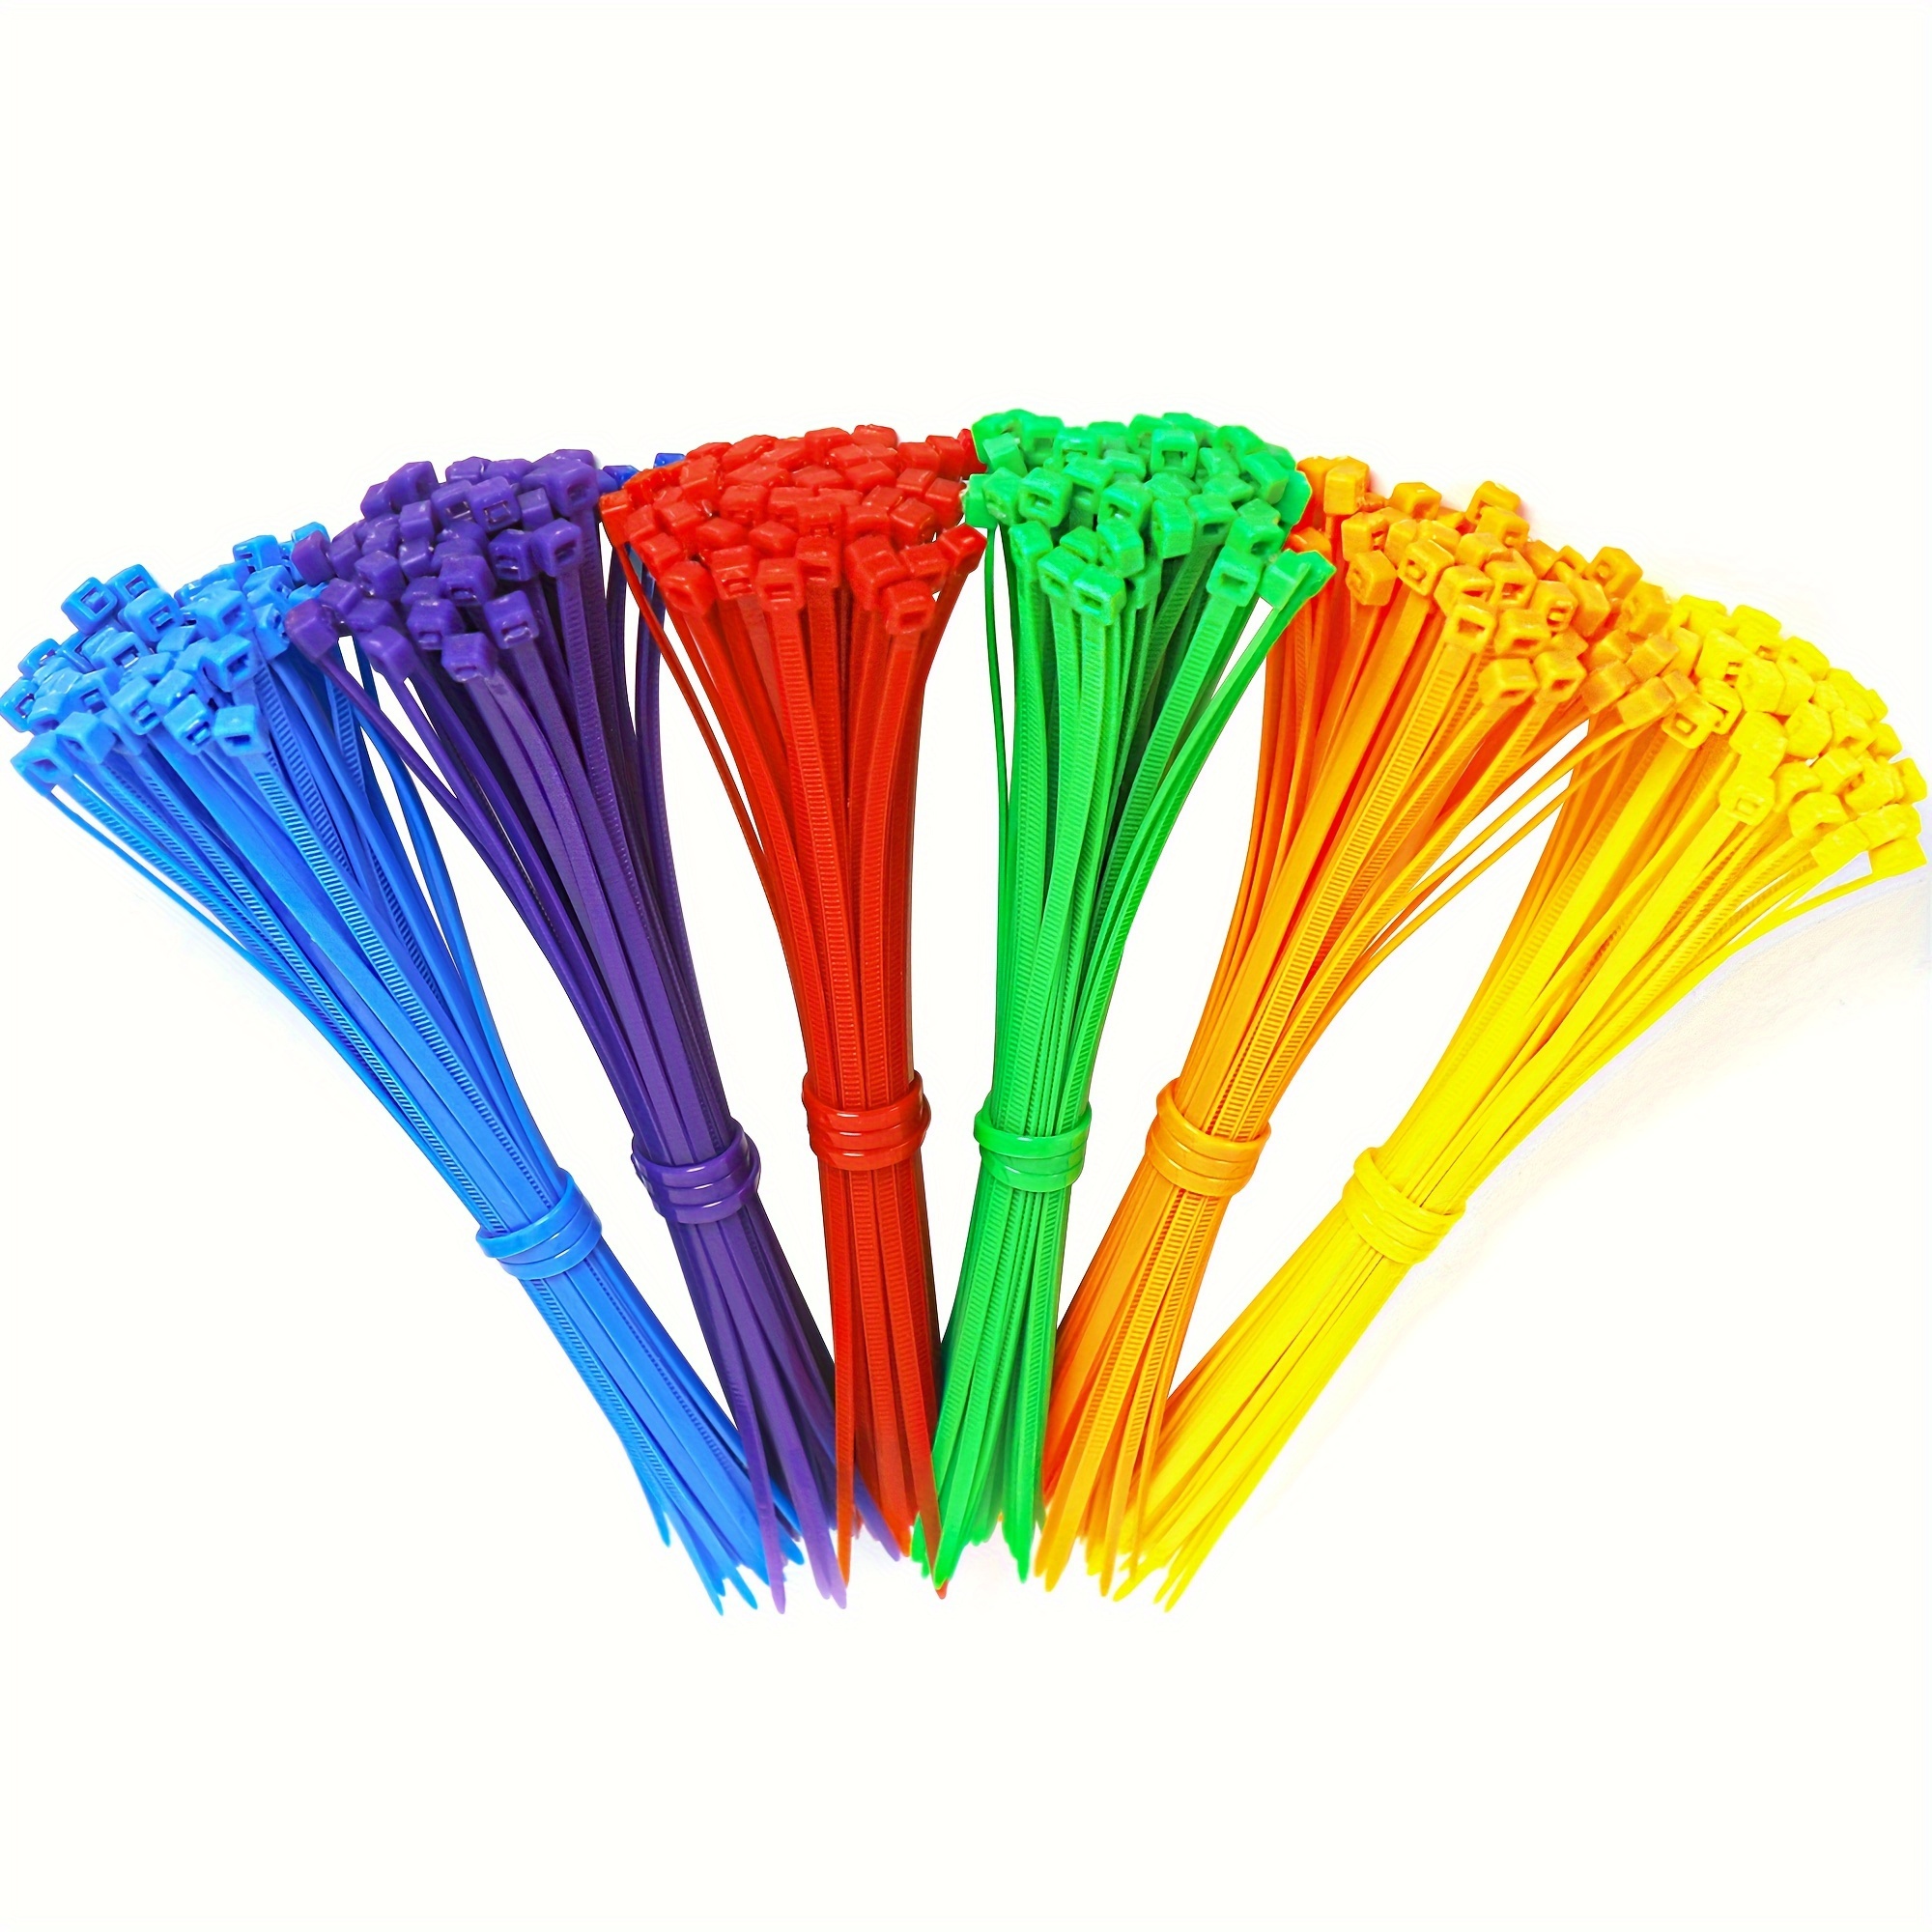 

300pcs Multi-purpose Nylon Zip Ties Durable Cable Wire Wraps Assorted Color 8 Inches 50 Lbs Tensile Strength Cord And Craft Management Perfect For Indoor And Outdoor